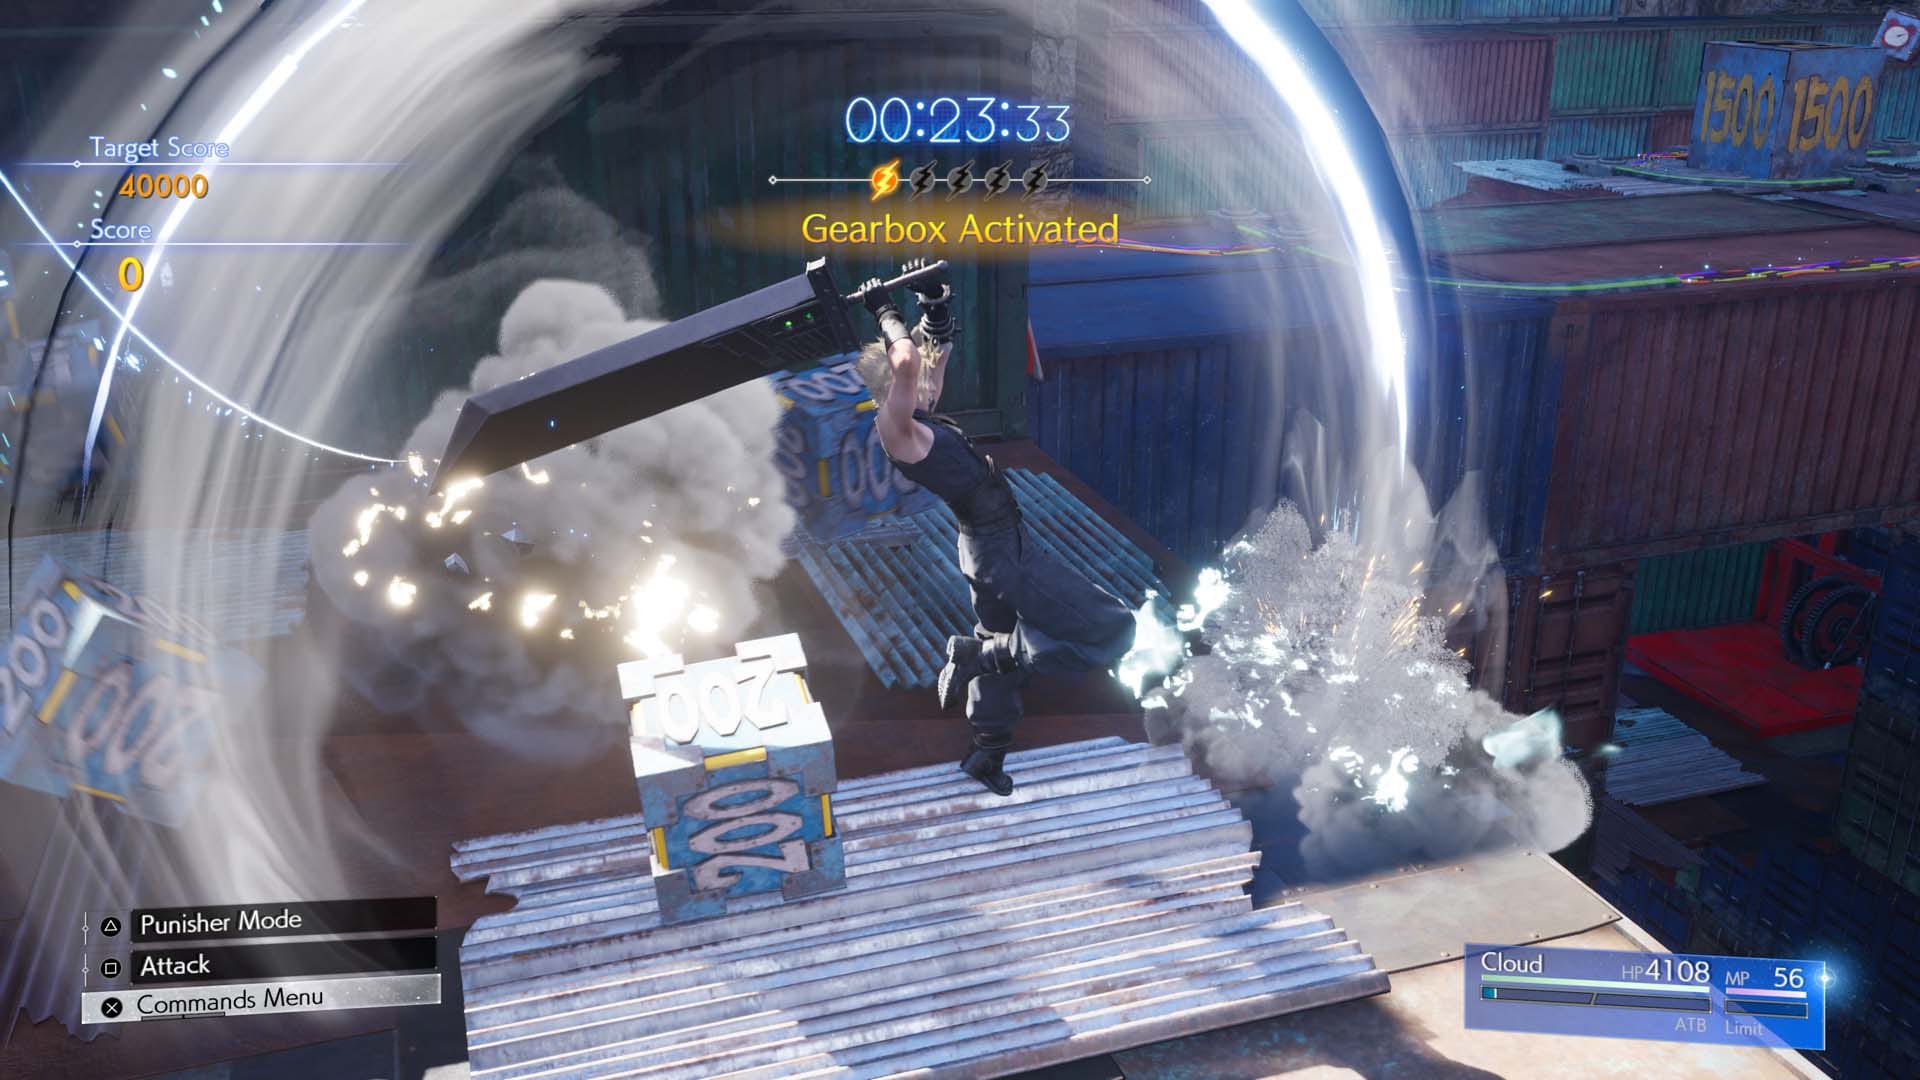 Cloud slashing boxes with his sword as "gearbox activated" appears above him.